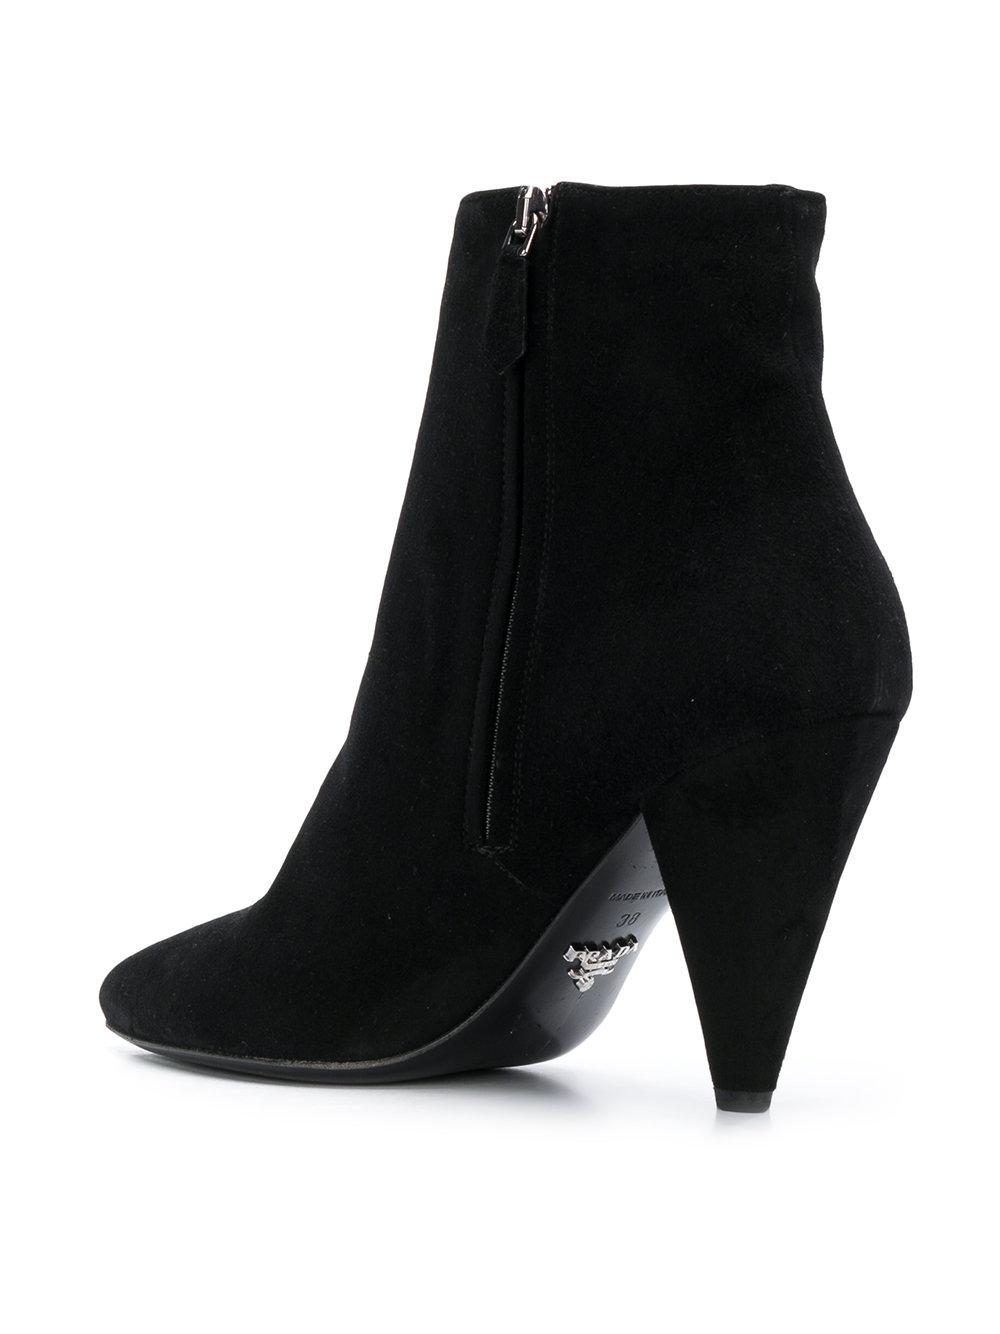 Prada Leather Pointed Ankle Boots in Black - Lyst